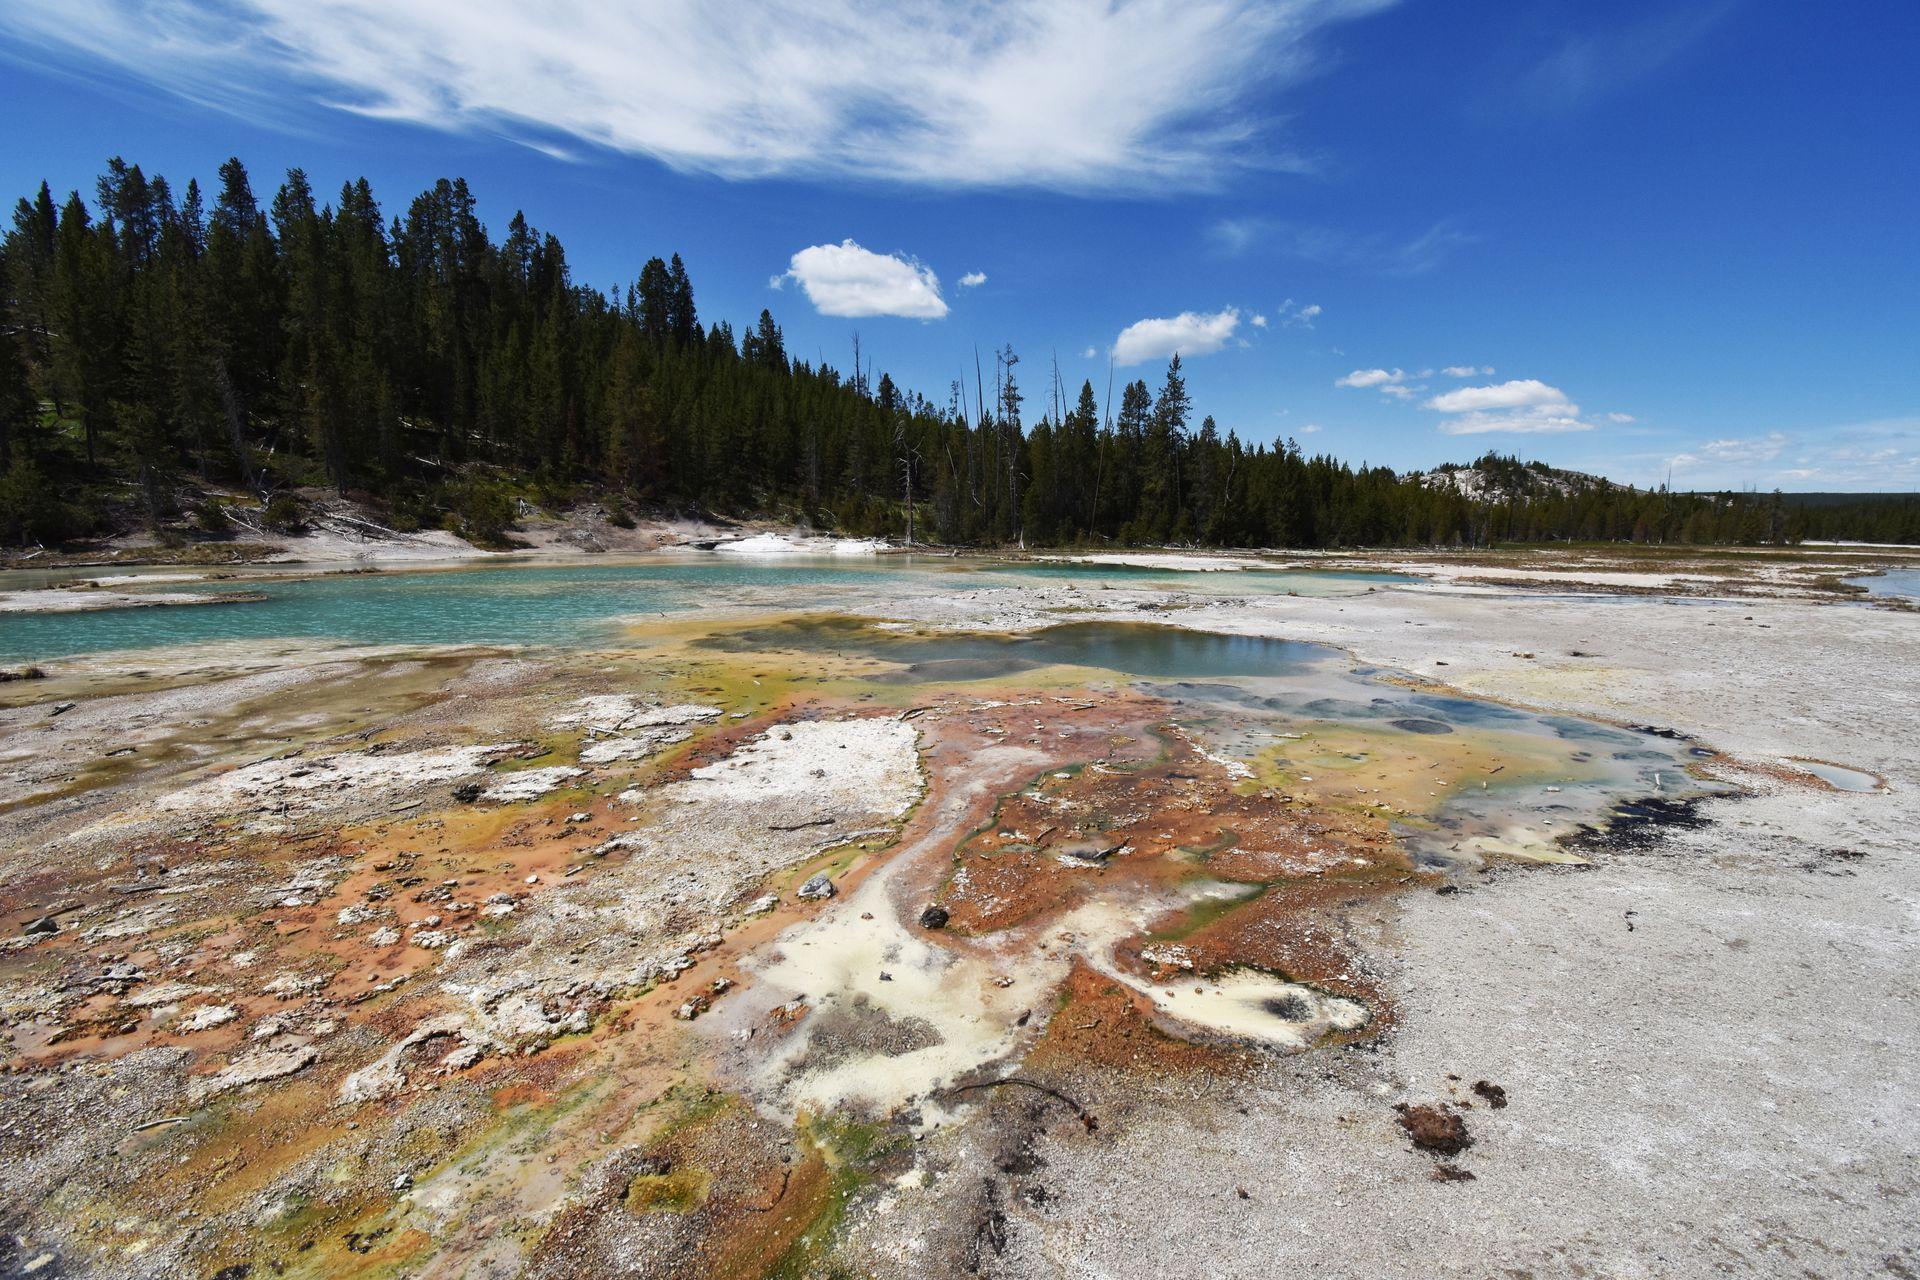 A colorful hot spring in the Norris Geyser Basin